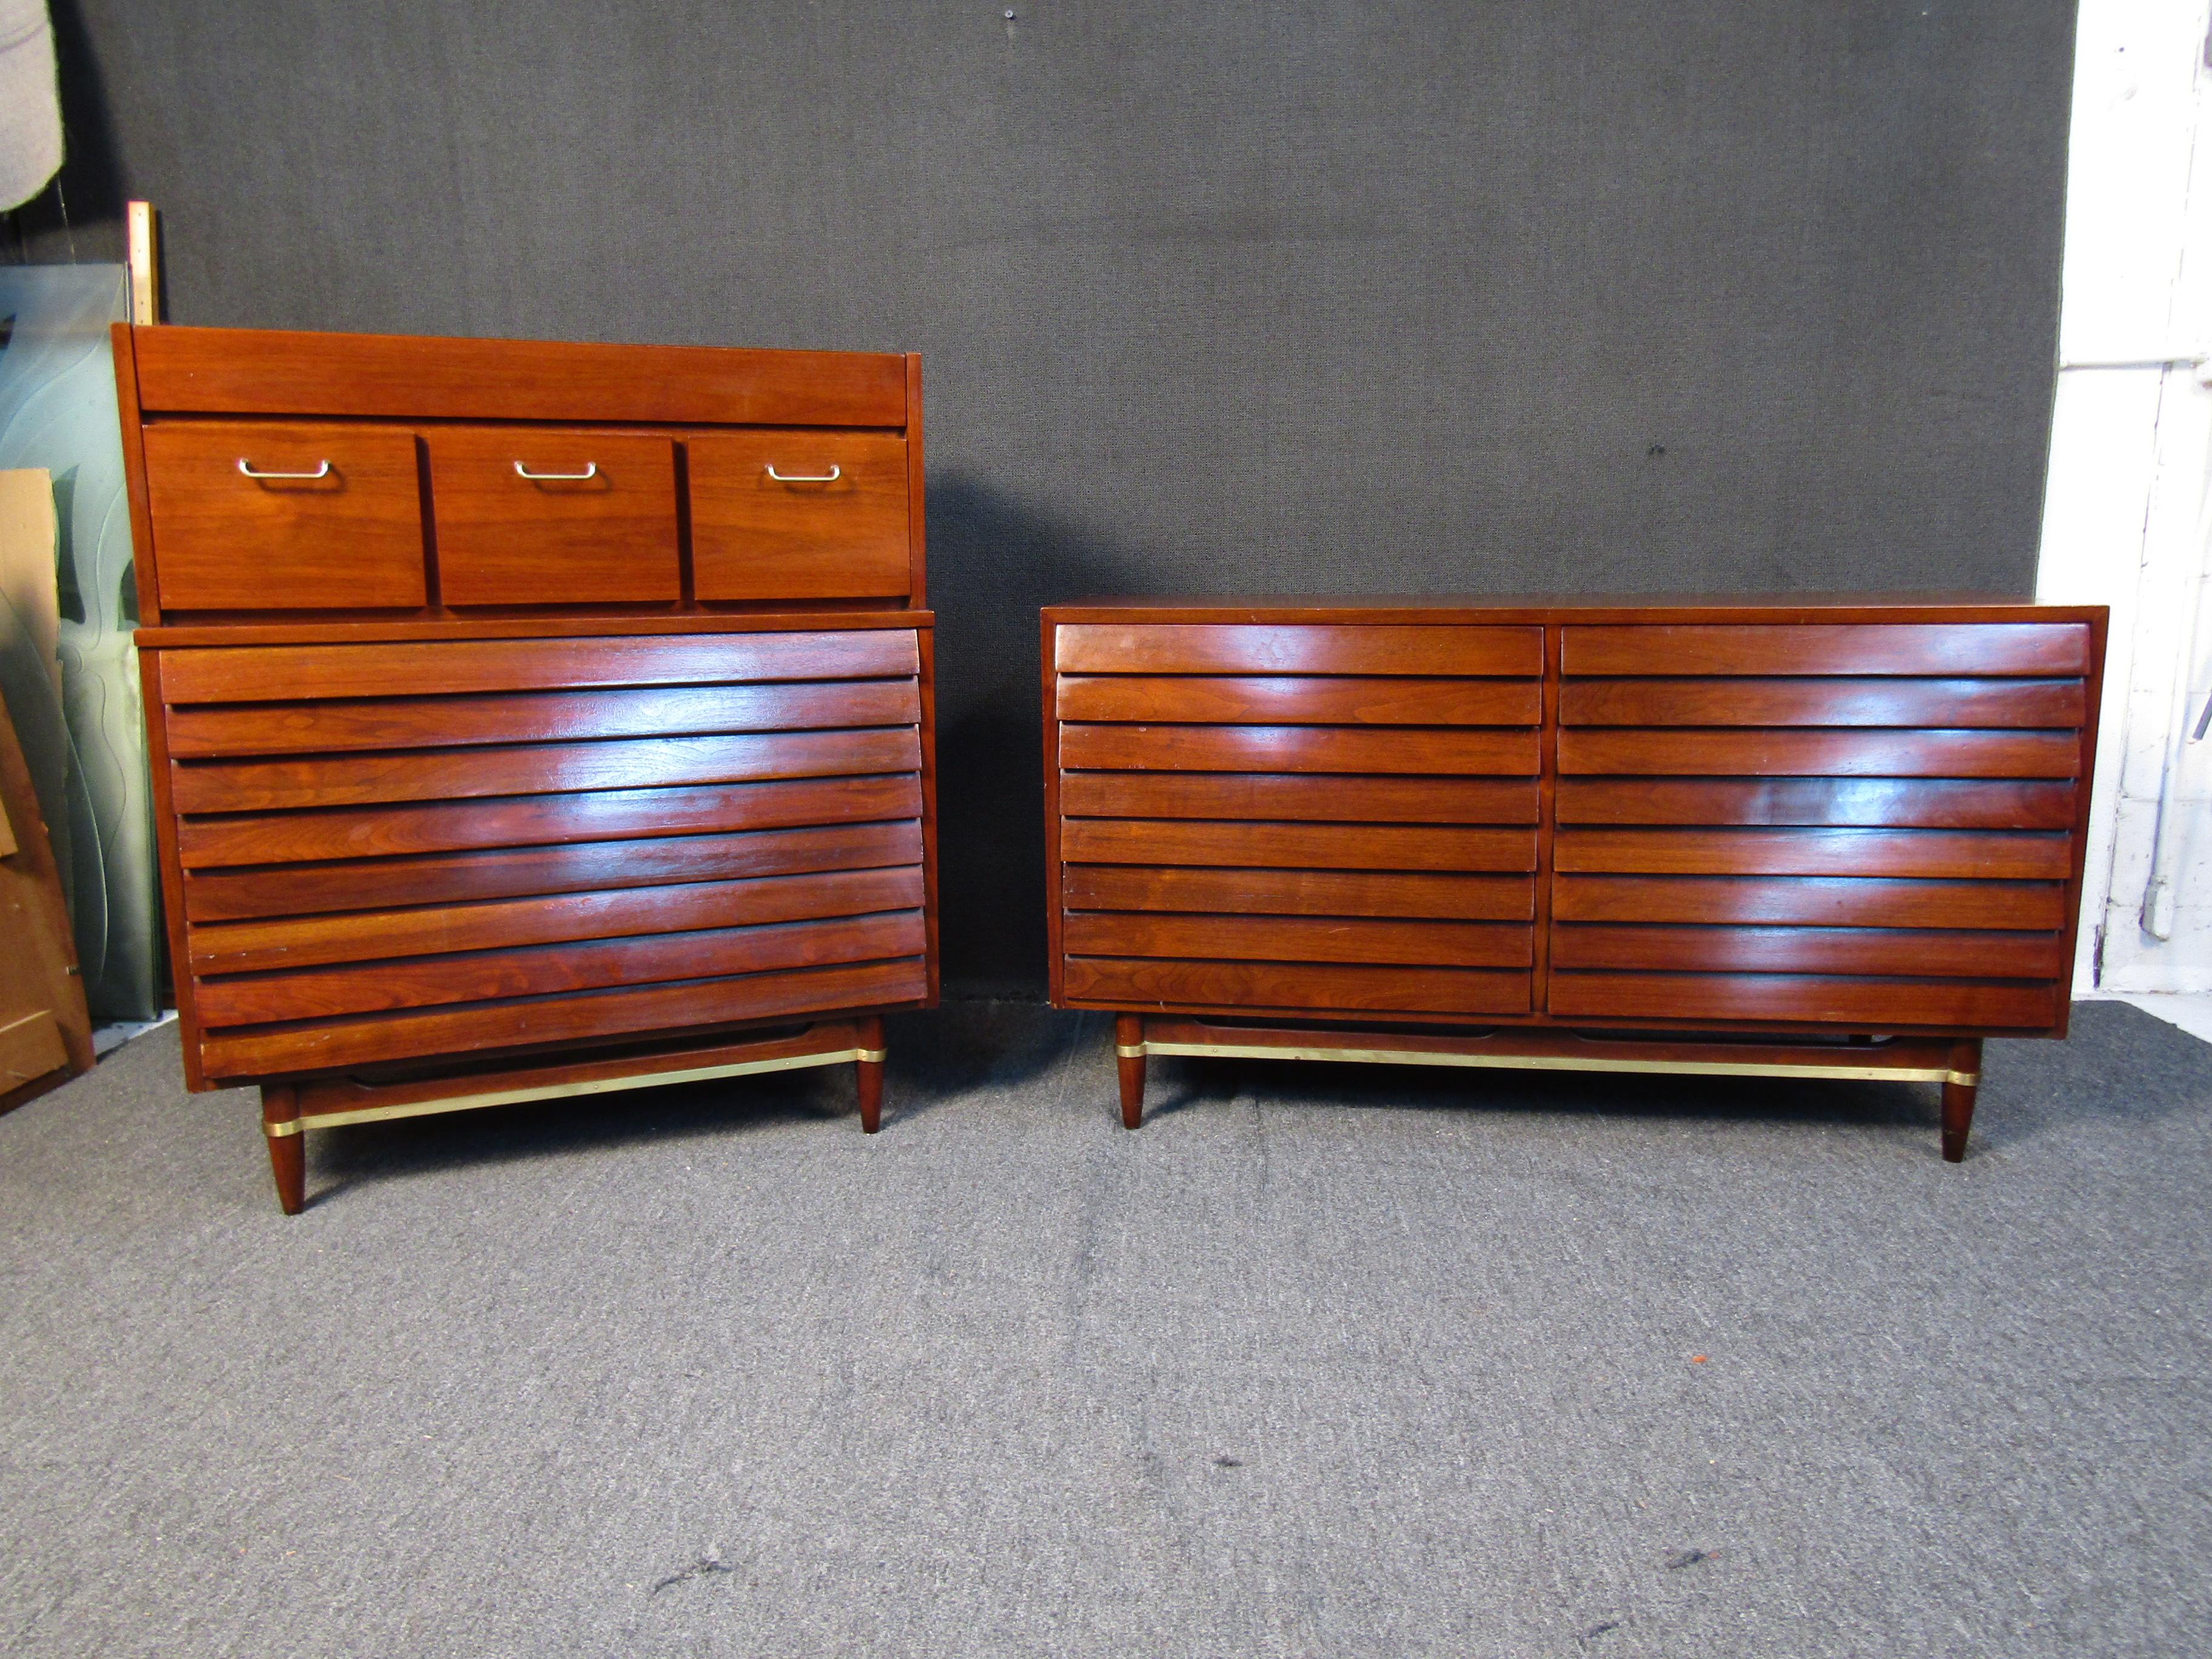 With a classic Mid-Century Modern design and rich walnut woodgrain, this dresser and highboy set by American of Martinsville can add timeless style to any bedroom. Large drawers allow for storage and organization. Please confirm item location with